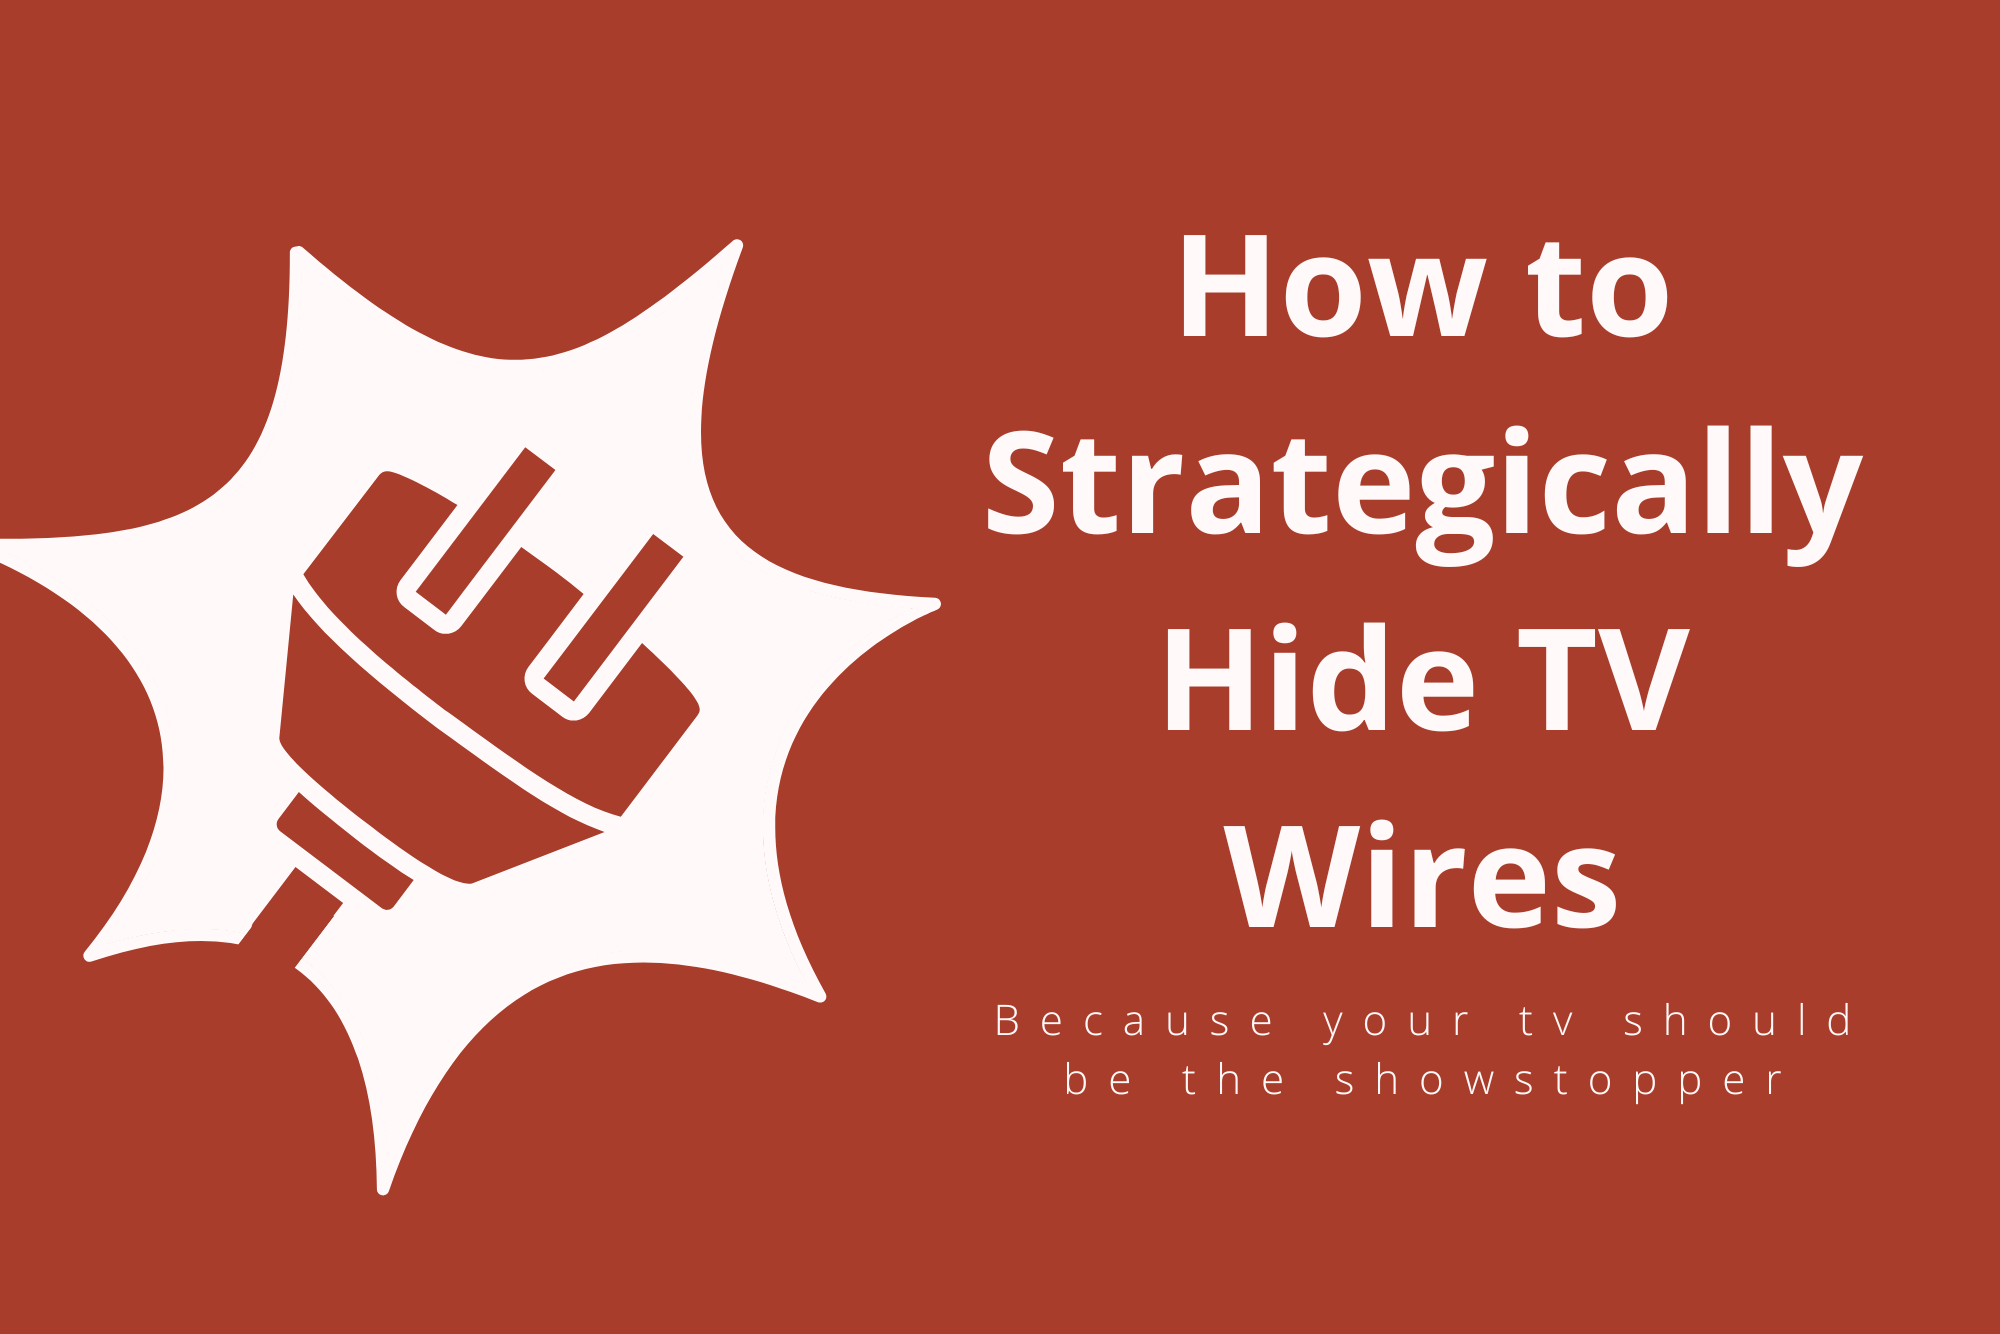 https://cdn.shopify.com/s/files/1/0758/7331/articles/MM_How_to_Hide_TV_Wires_2.png?v=1670522643